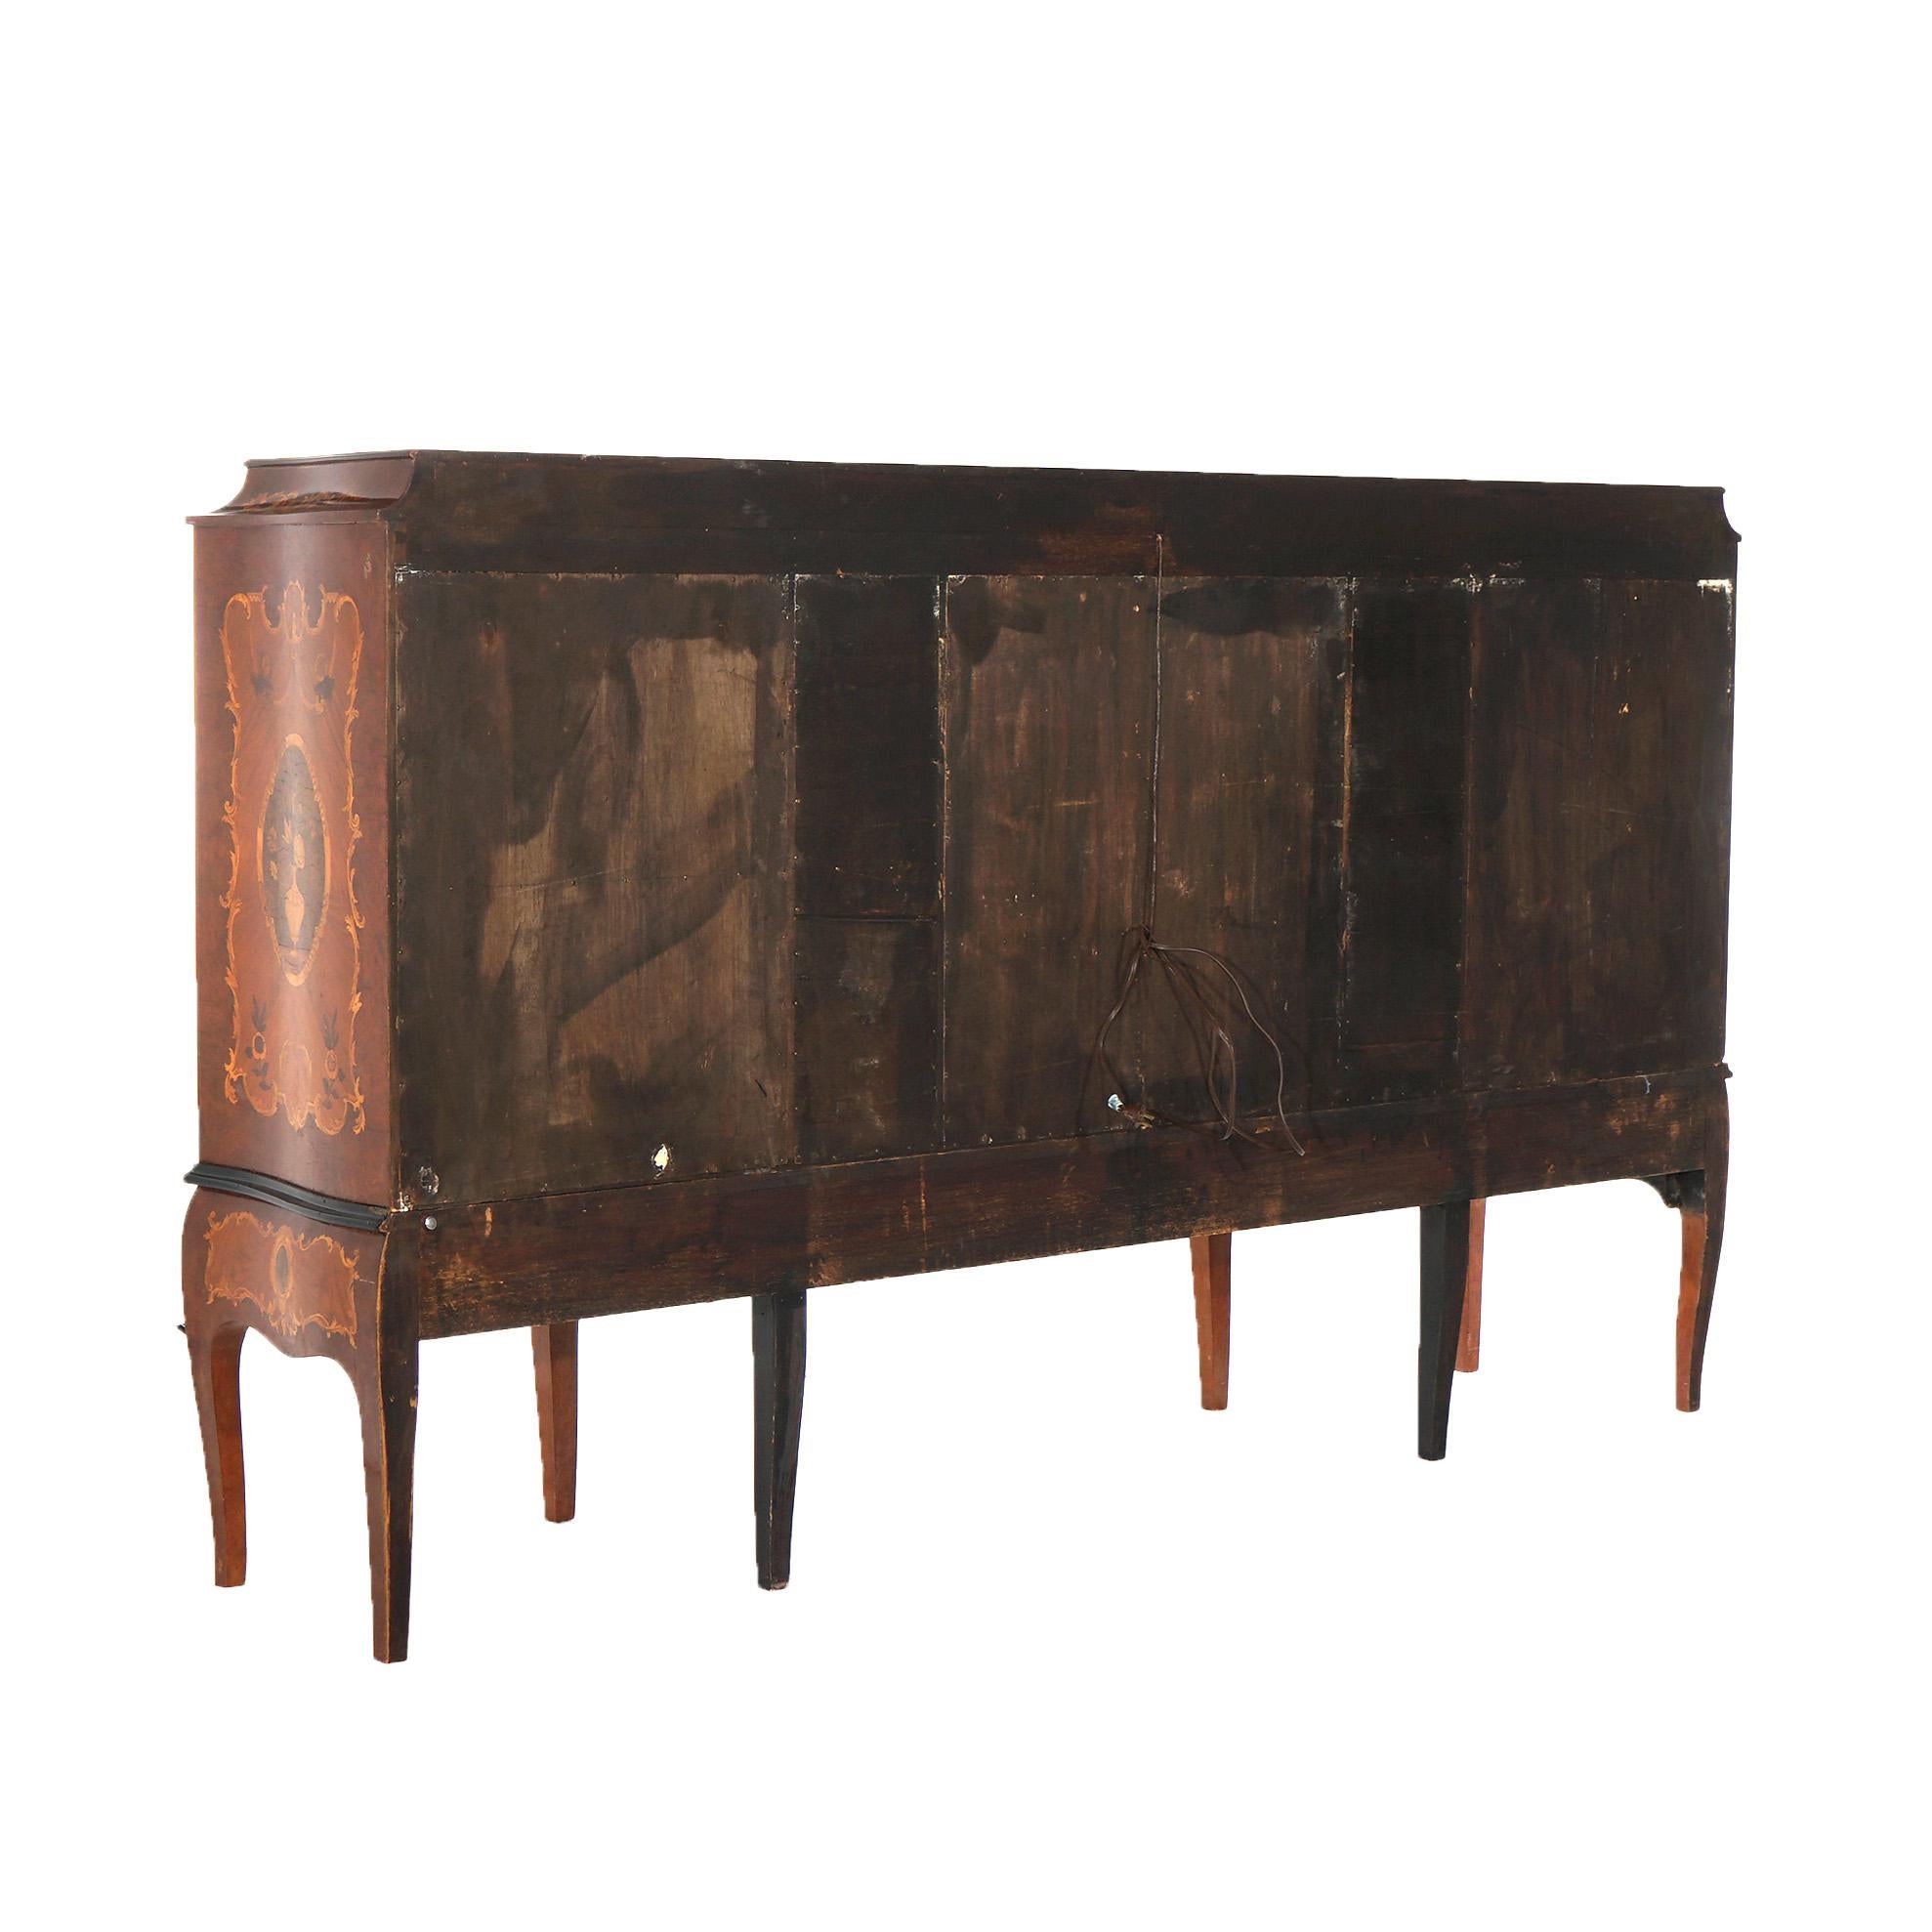 Antique French Kingwood Satinwood & Burlwood Marquetry Inlaid Sideboard C1930 For Sale 6